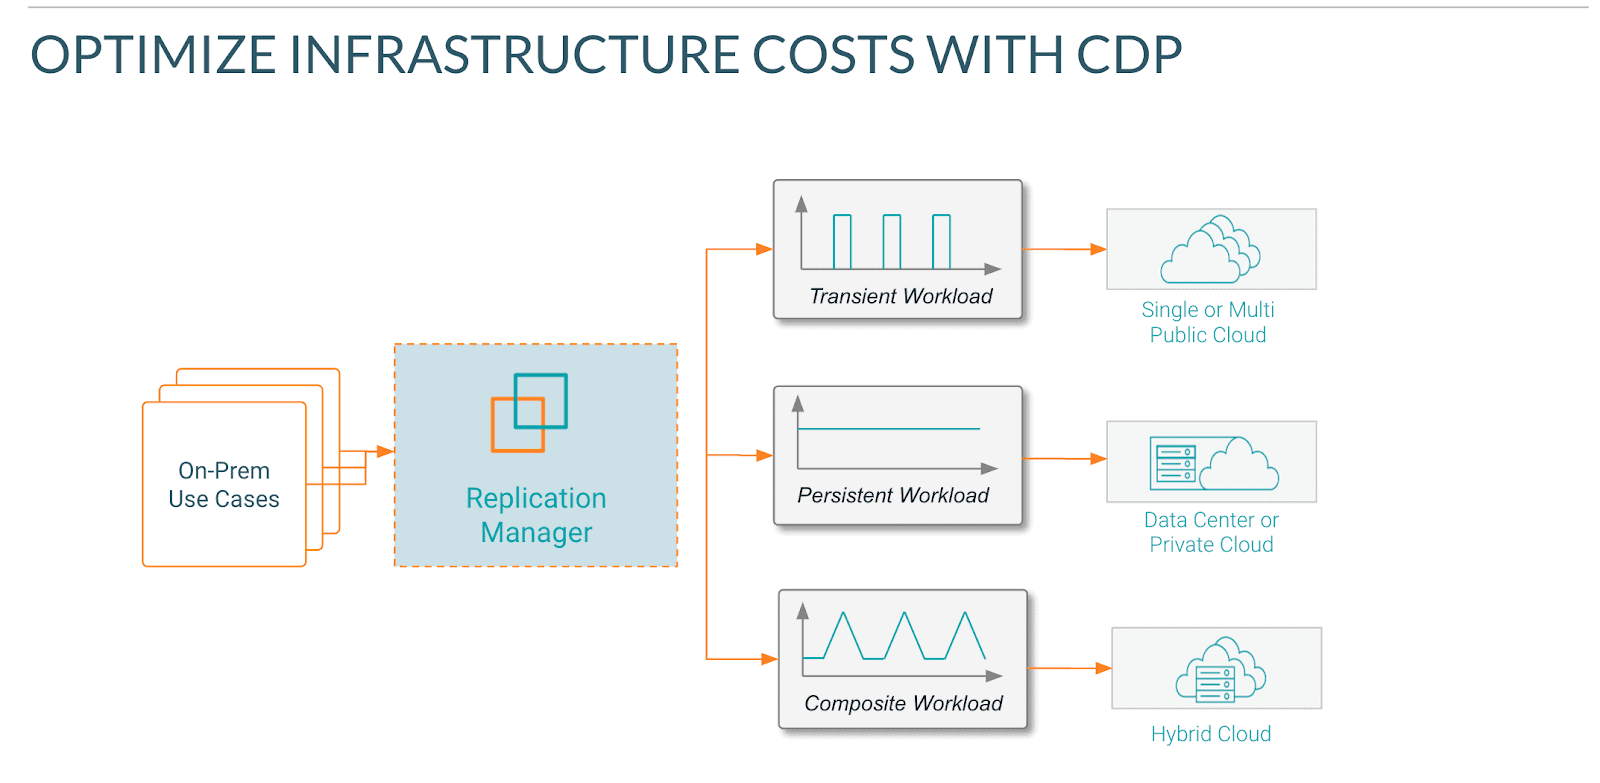 Optimize Infrastructure Costs with CDP